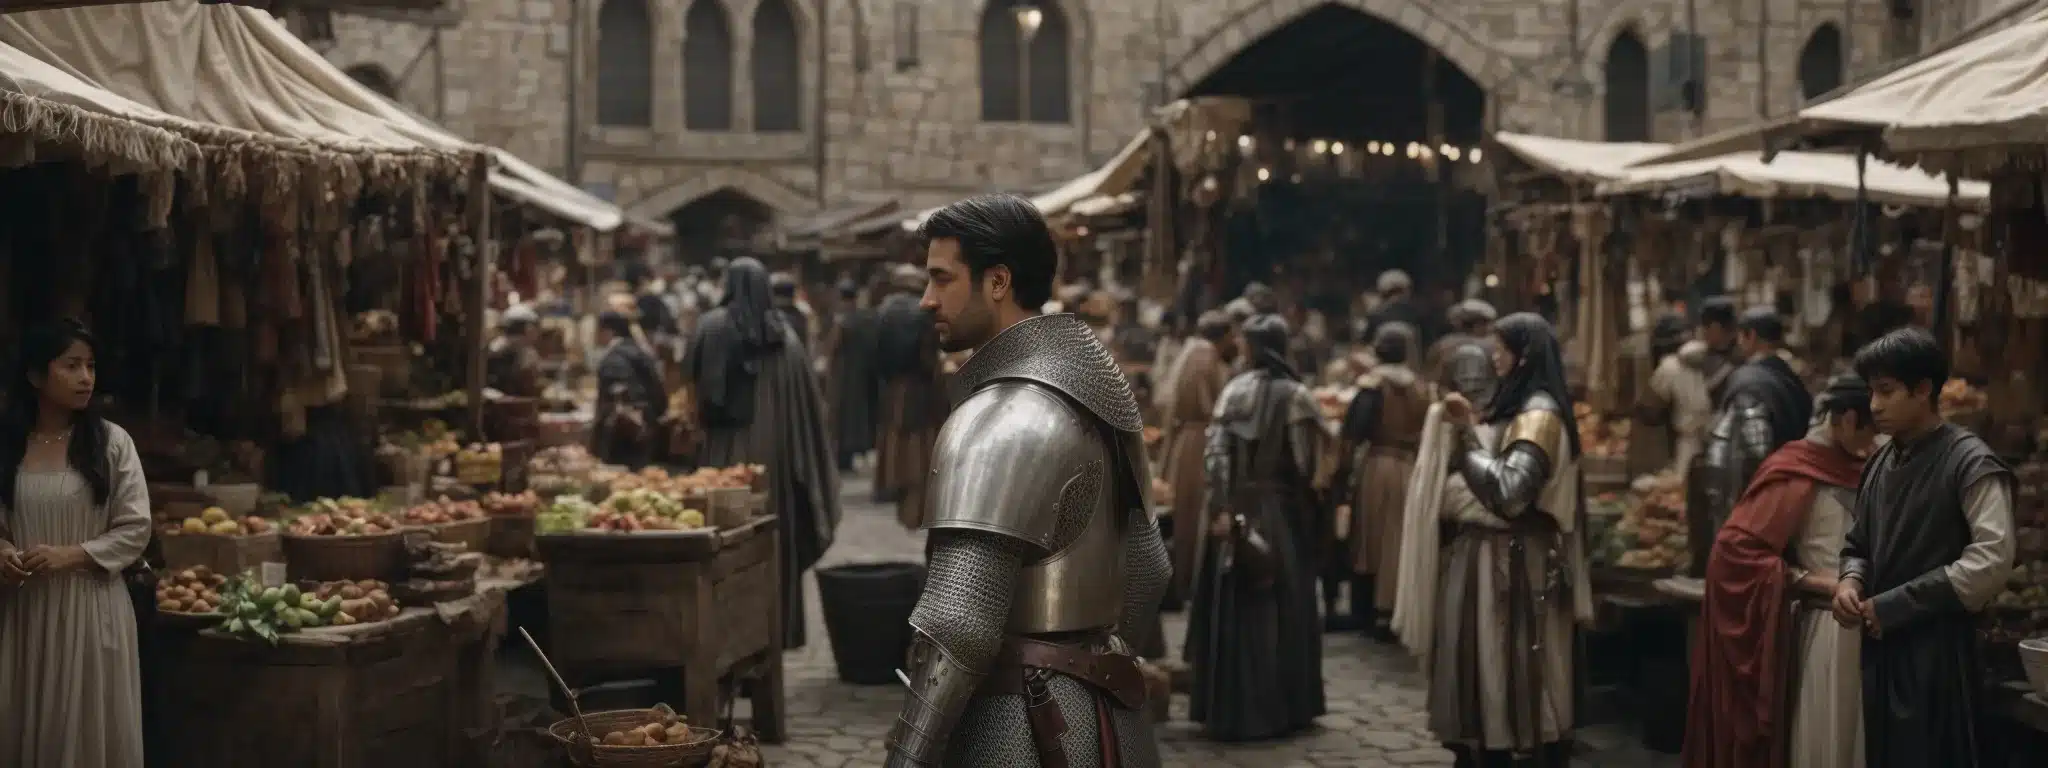 A Knight In Shining Armor Stands In A Bustling Medieval Marketplace, Symbolizing A Distinctive Brand Identity Among Numerous Vendors.